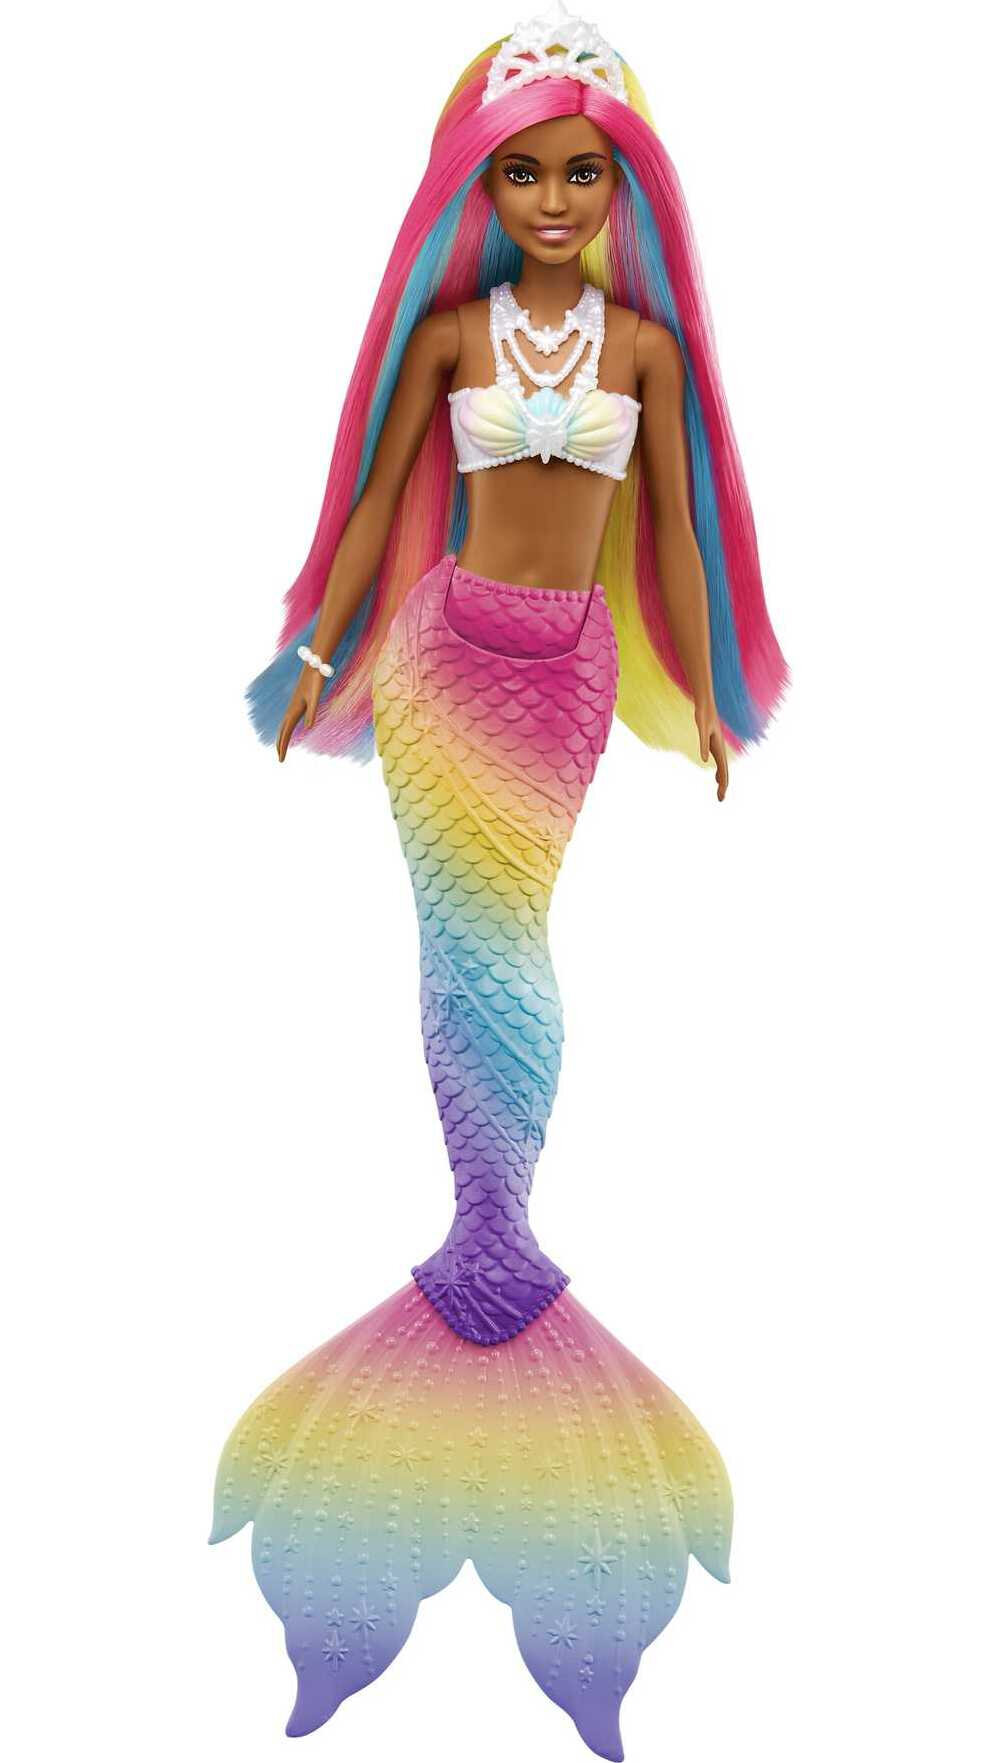 Barbie Dreamtopia Mermaid Doll with Rainbow Hair, Light Brown Eyes & Color-Change Feature - image 1 of 7